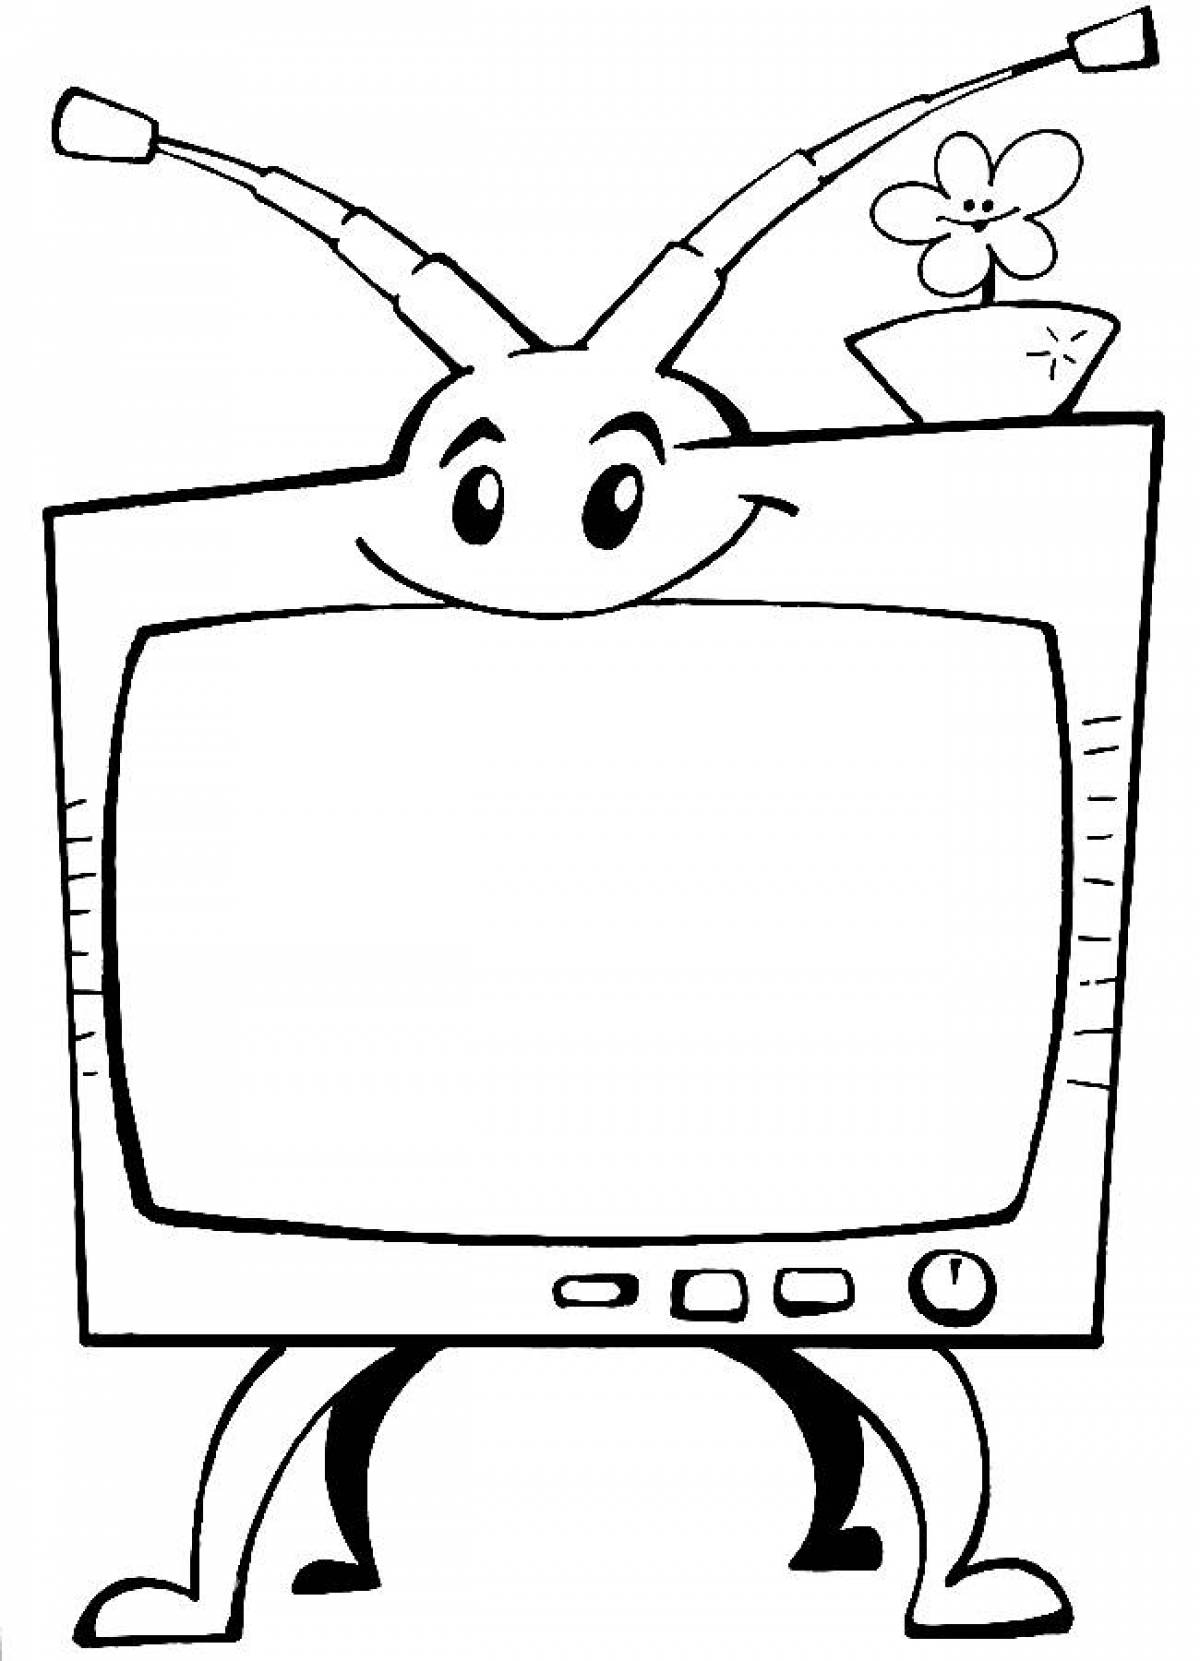 TV coloring page